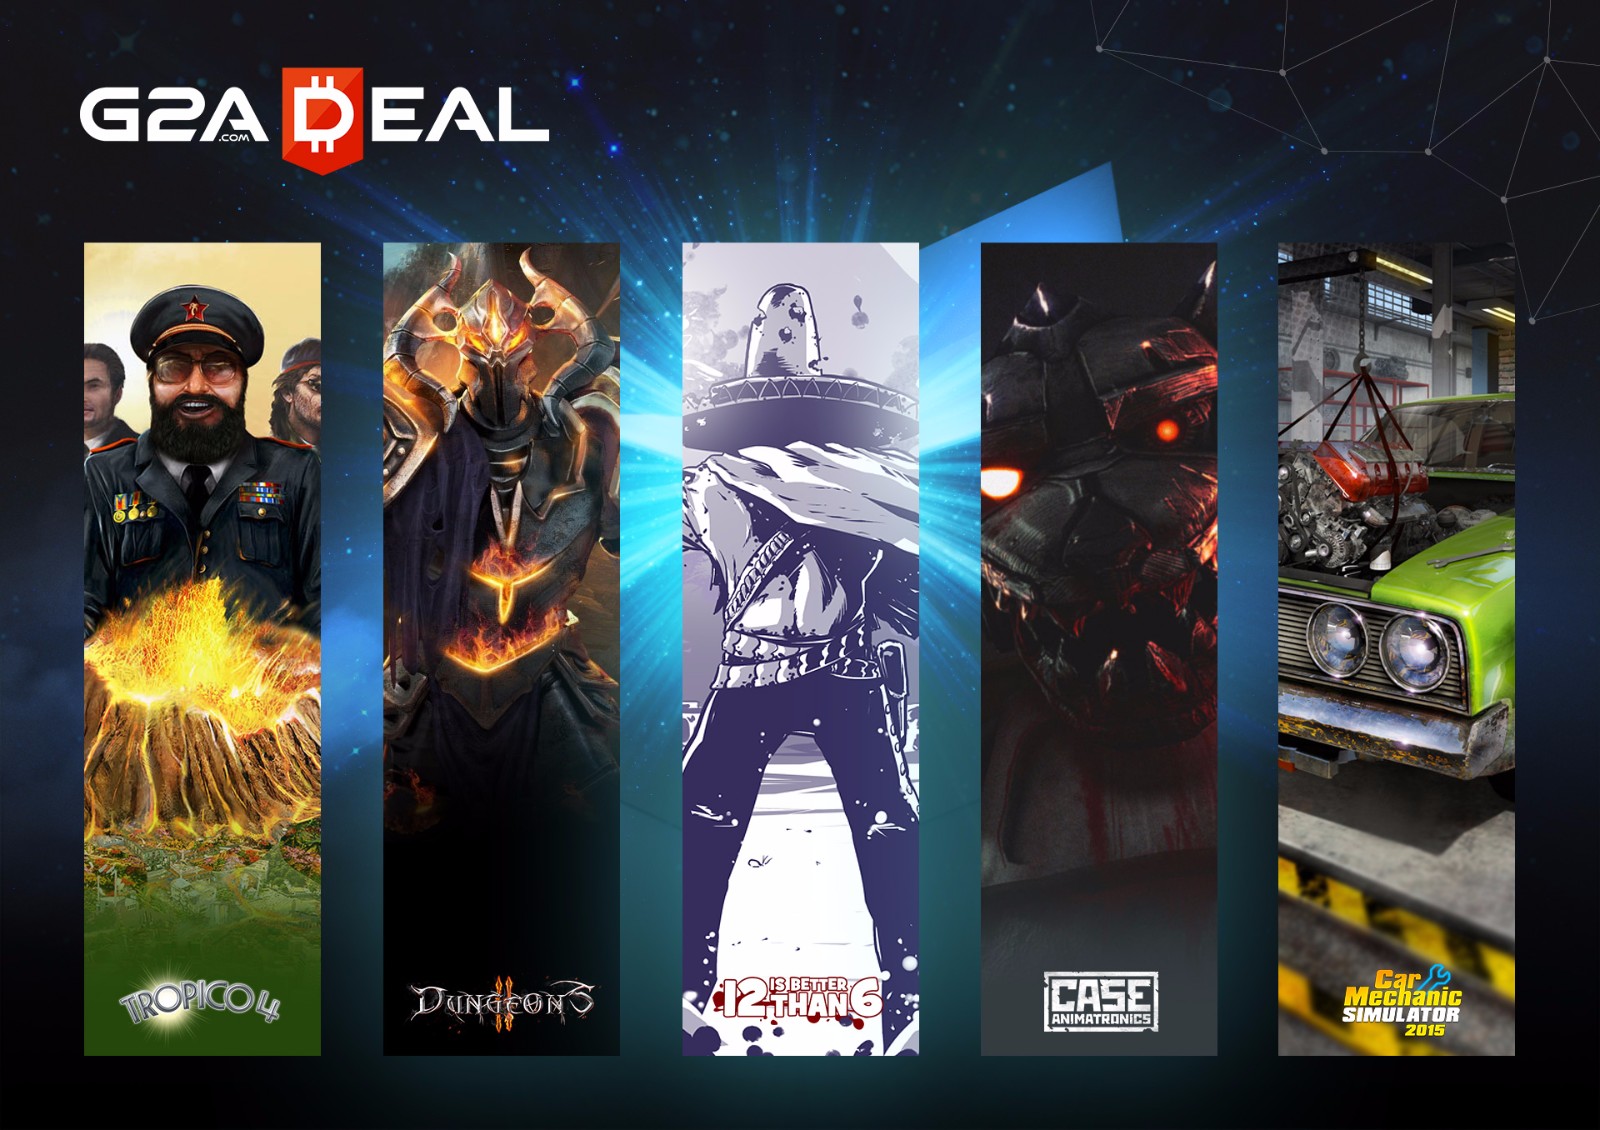 Dictators, dungeons, and drives: G2A Deal #4 launches on June 14th